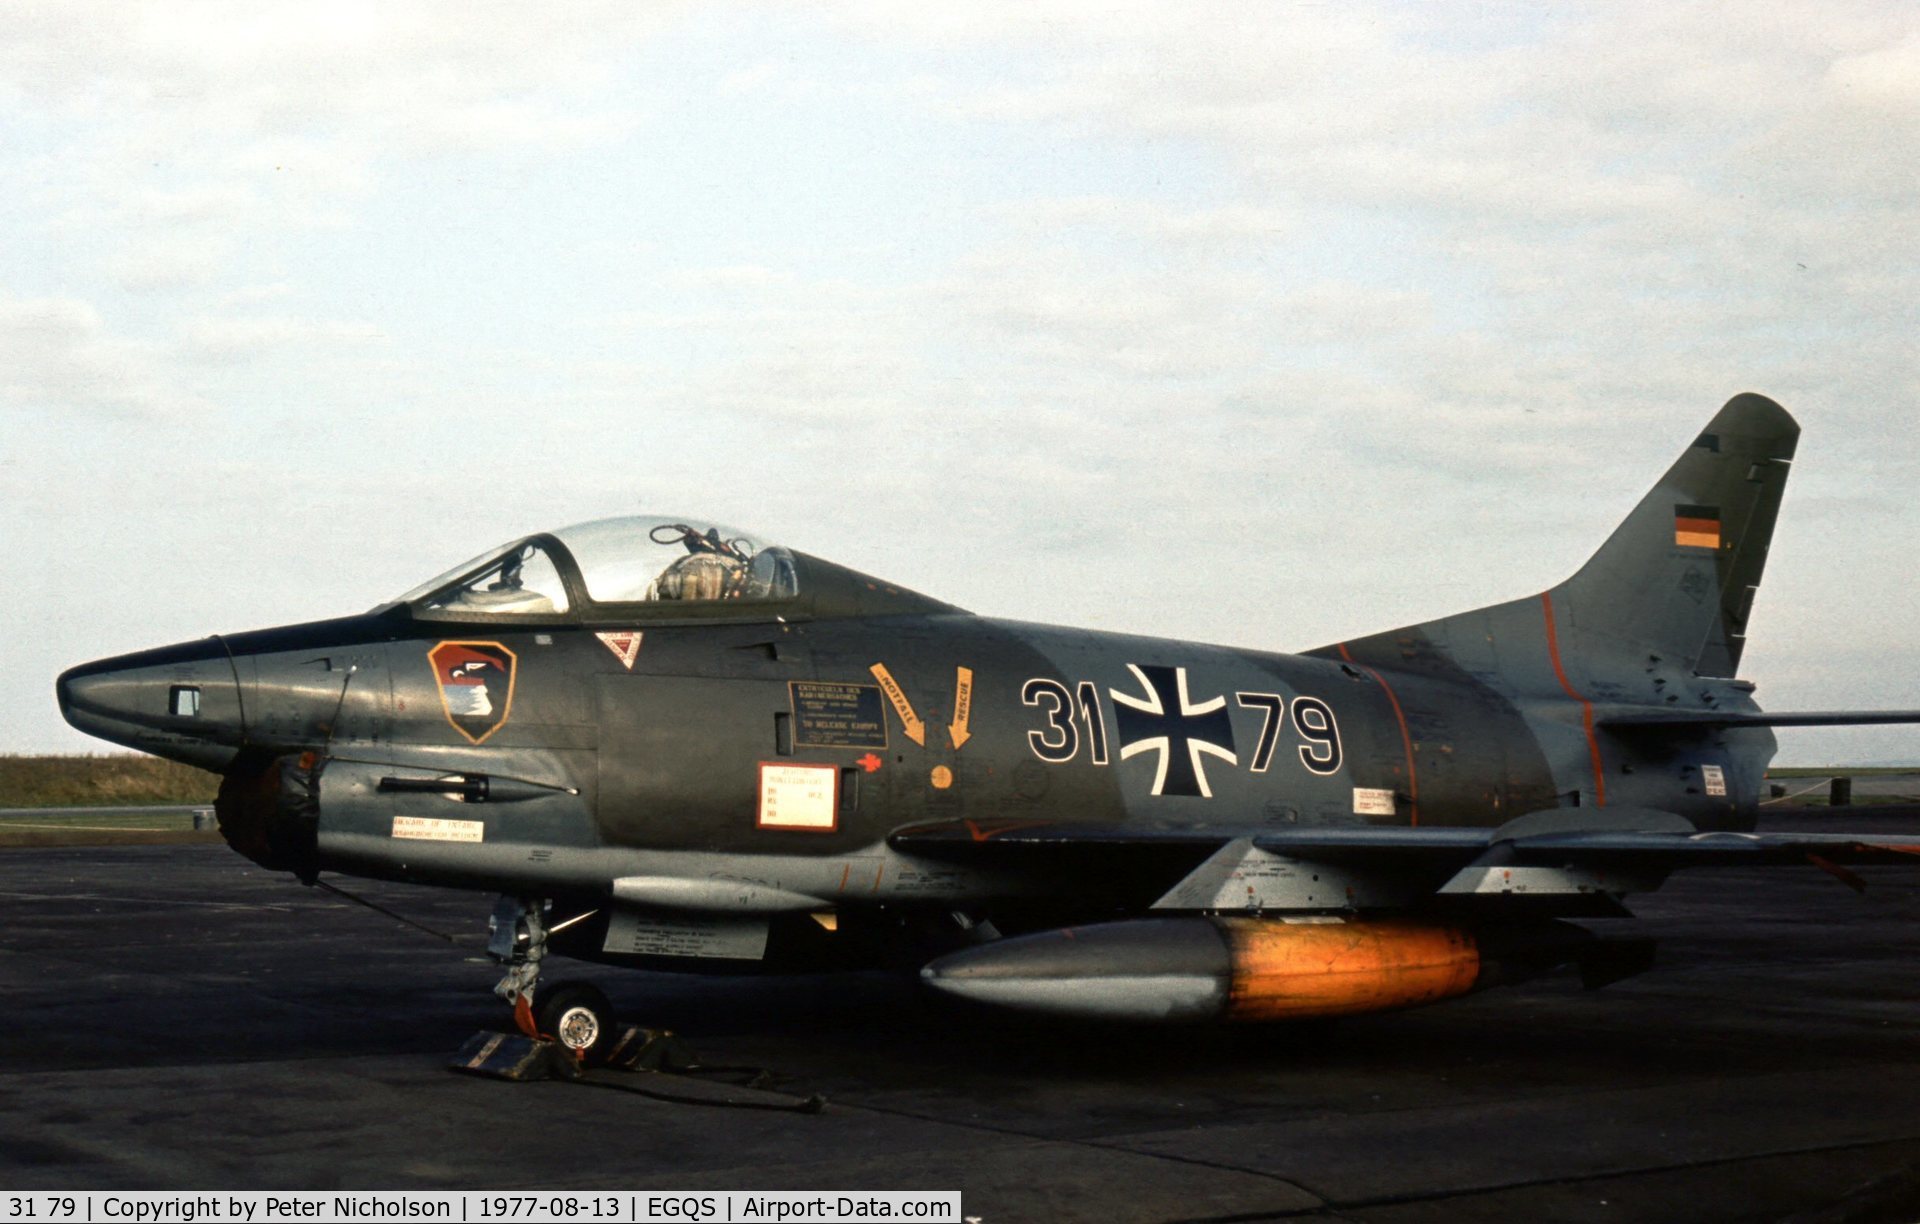 31 79, Fiat G-91R/3 C/N D447, G-91R-3 of LKG-41 at the 1977 RAF Lossiemouth Open Day.